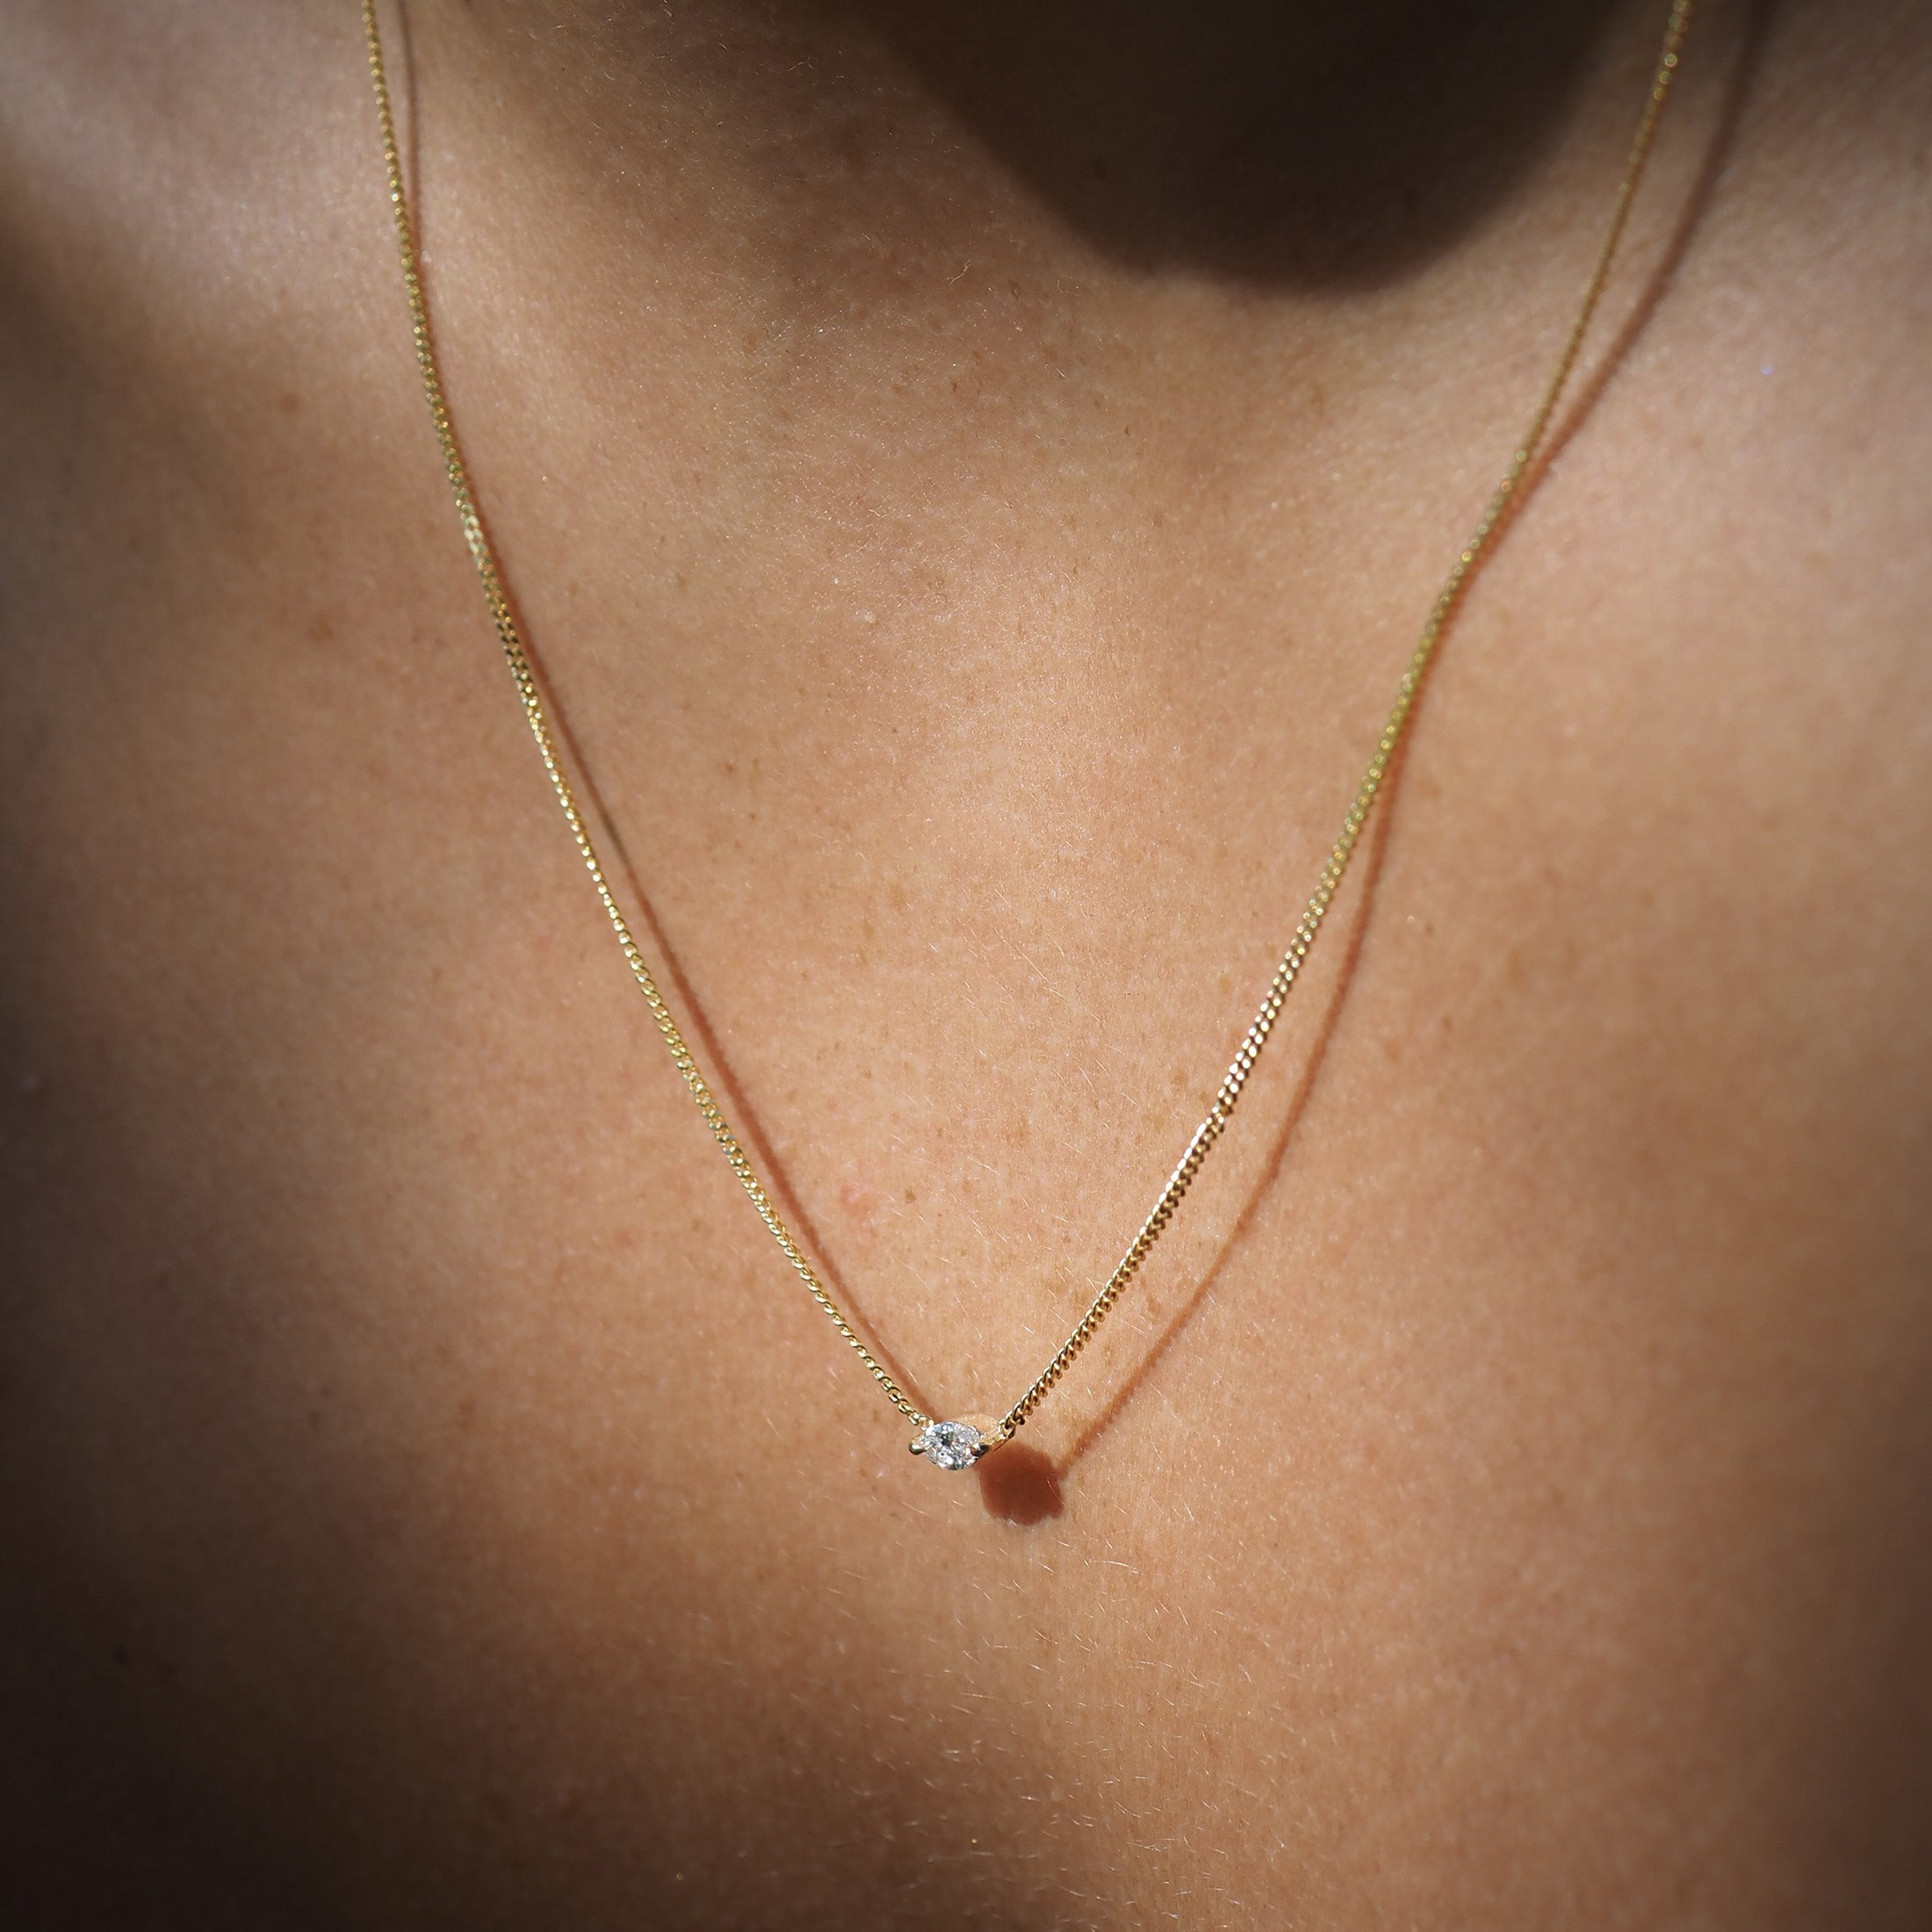 Marquise lab-grown diamond necklace, handset within two claws and featured on yellow gold chain. 